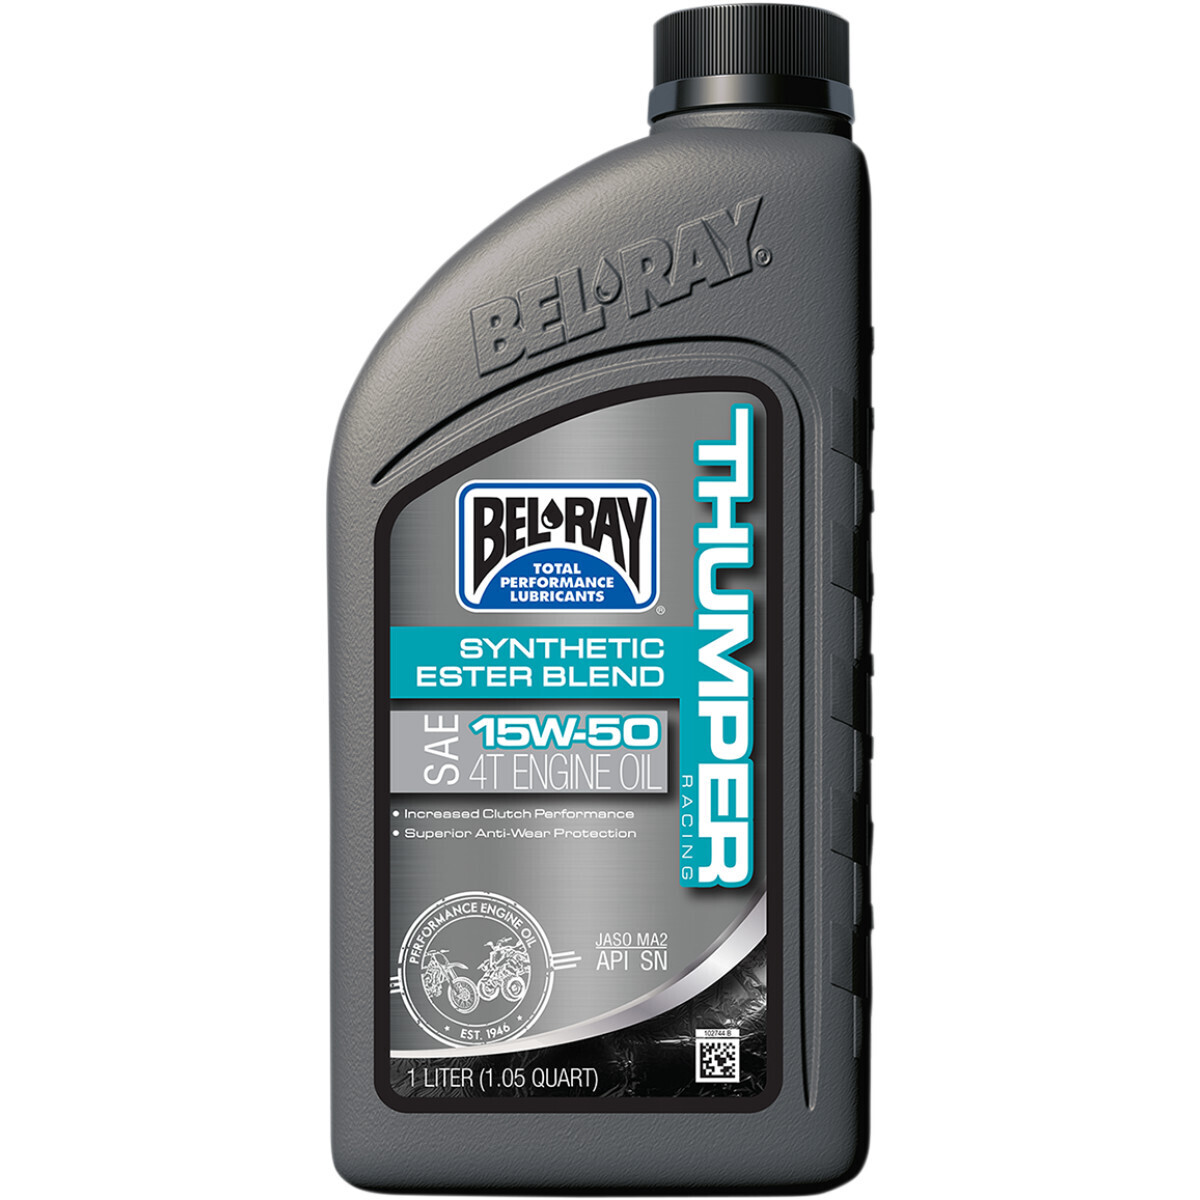 BEL-RAY
THUMPER RACING SYNTHETIC ESTER BLEND 4-STROKE ENGINE OIL 15W-50 1 LITER